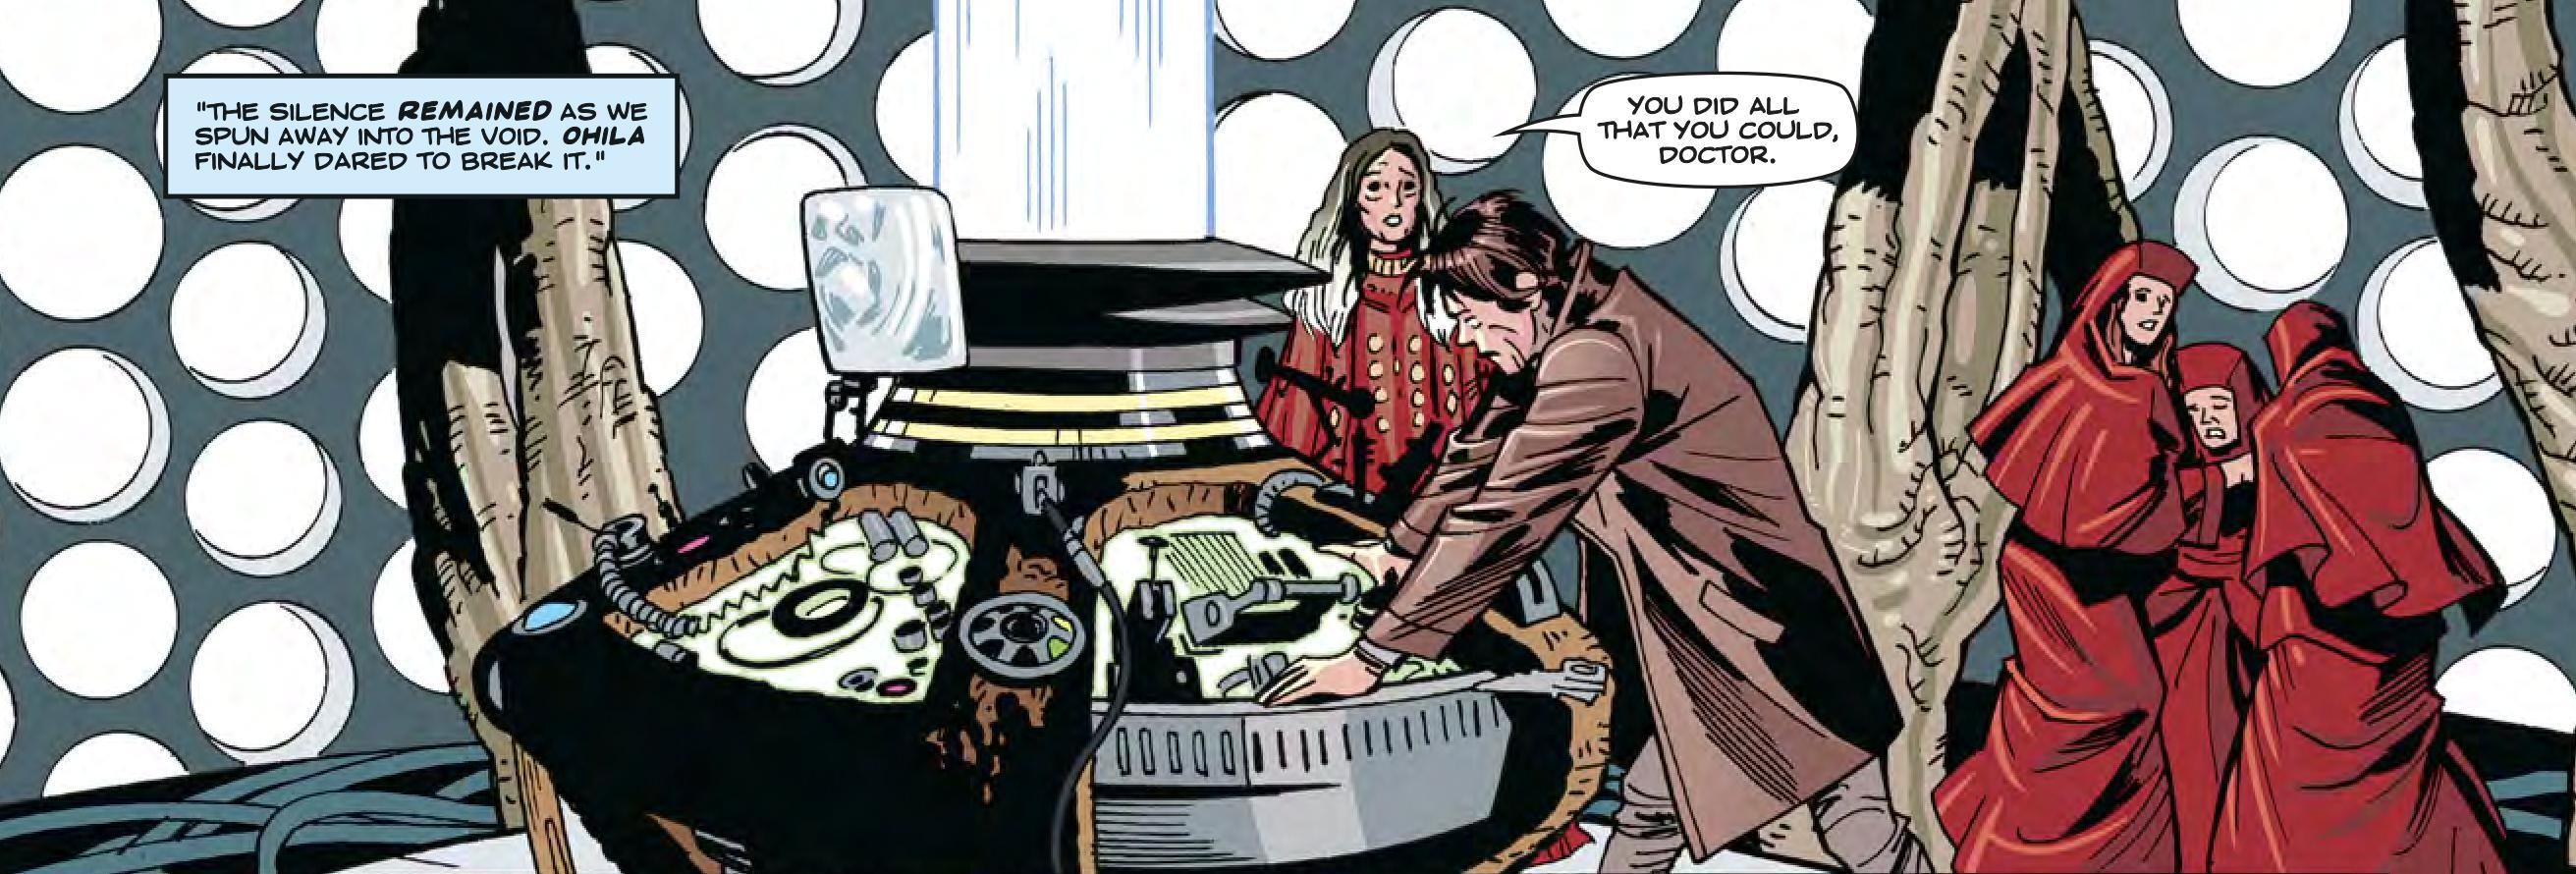 The War Doctor and the Sisterhood of Karn in the TARDIS following Fey's apparent death in the Time War. (COMIC: The Clockwise War [+]Loading...["The Clockwise War (comic story)"])